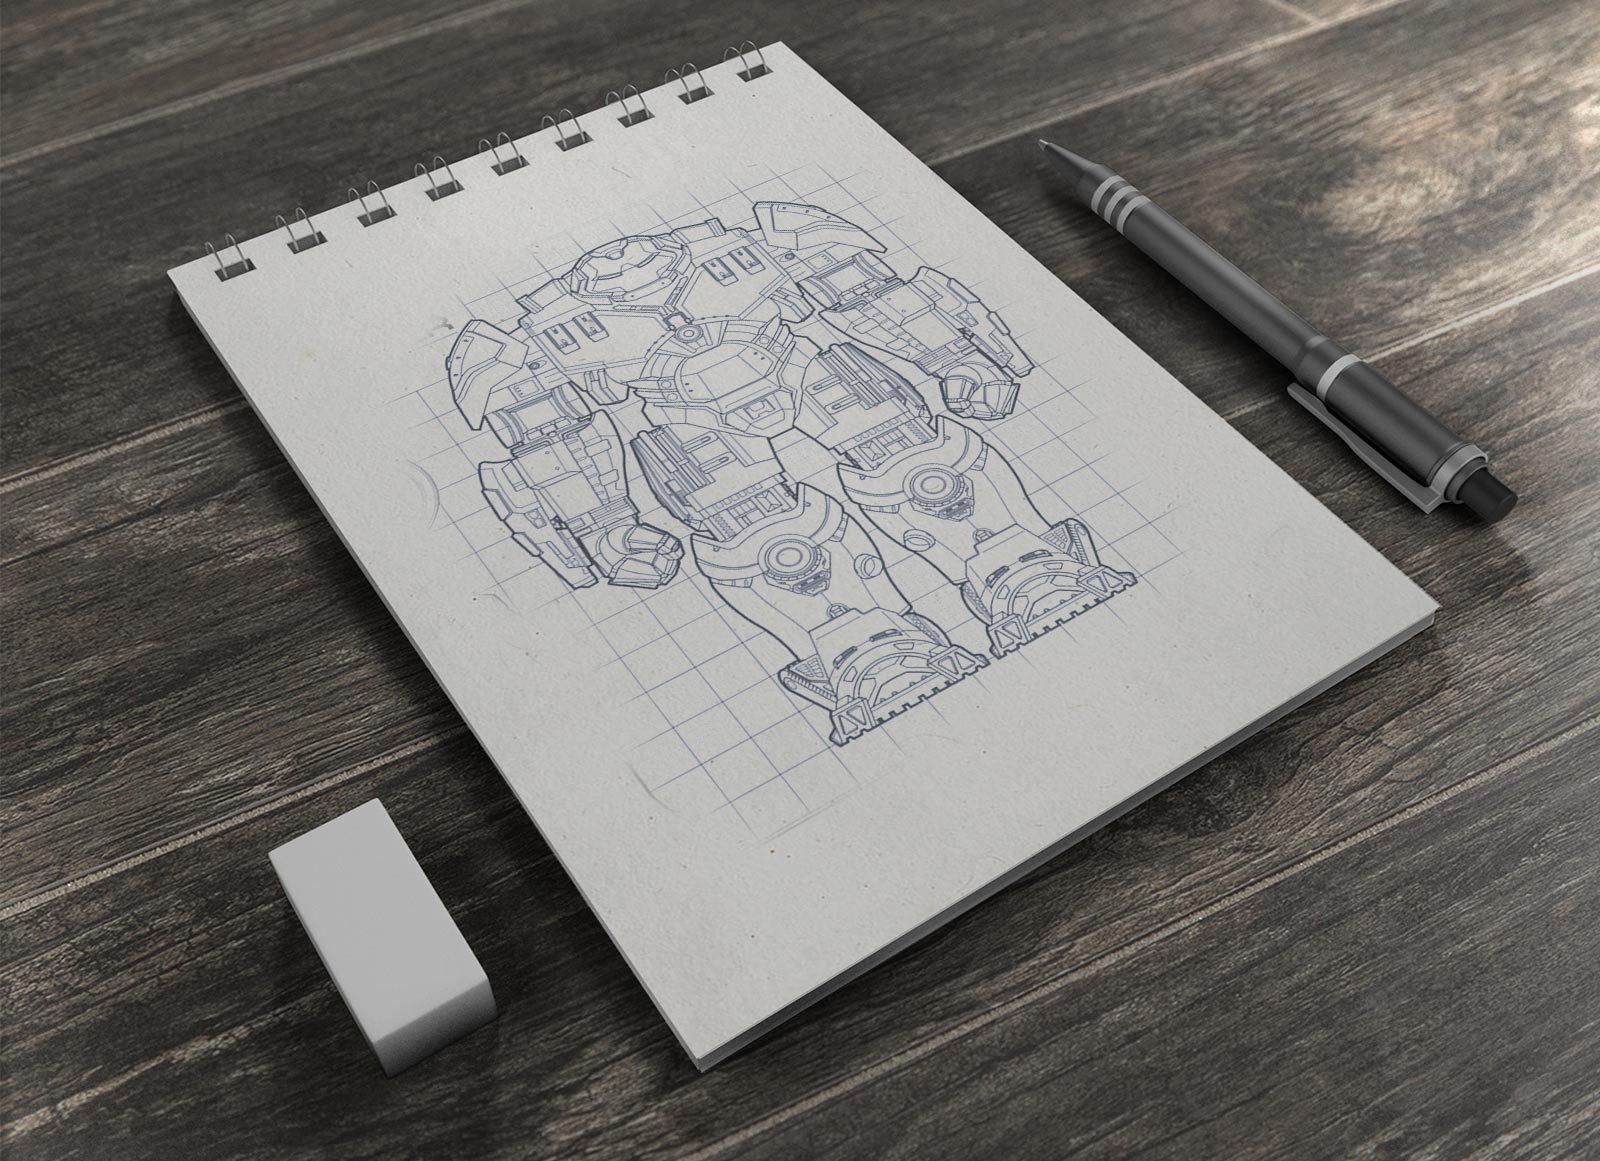 Free Mock Up Sketch Book With Mechanical Pencil And Loupe by FruityLOGIC  Design on Dribbble